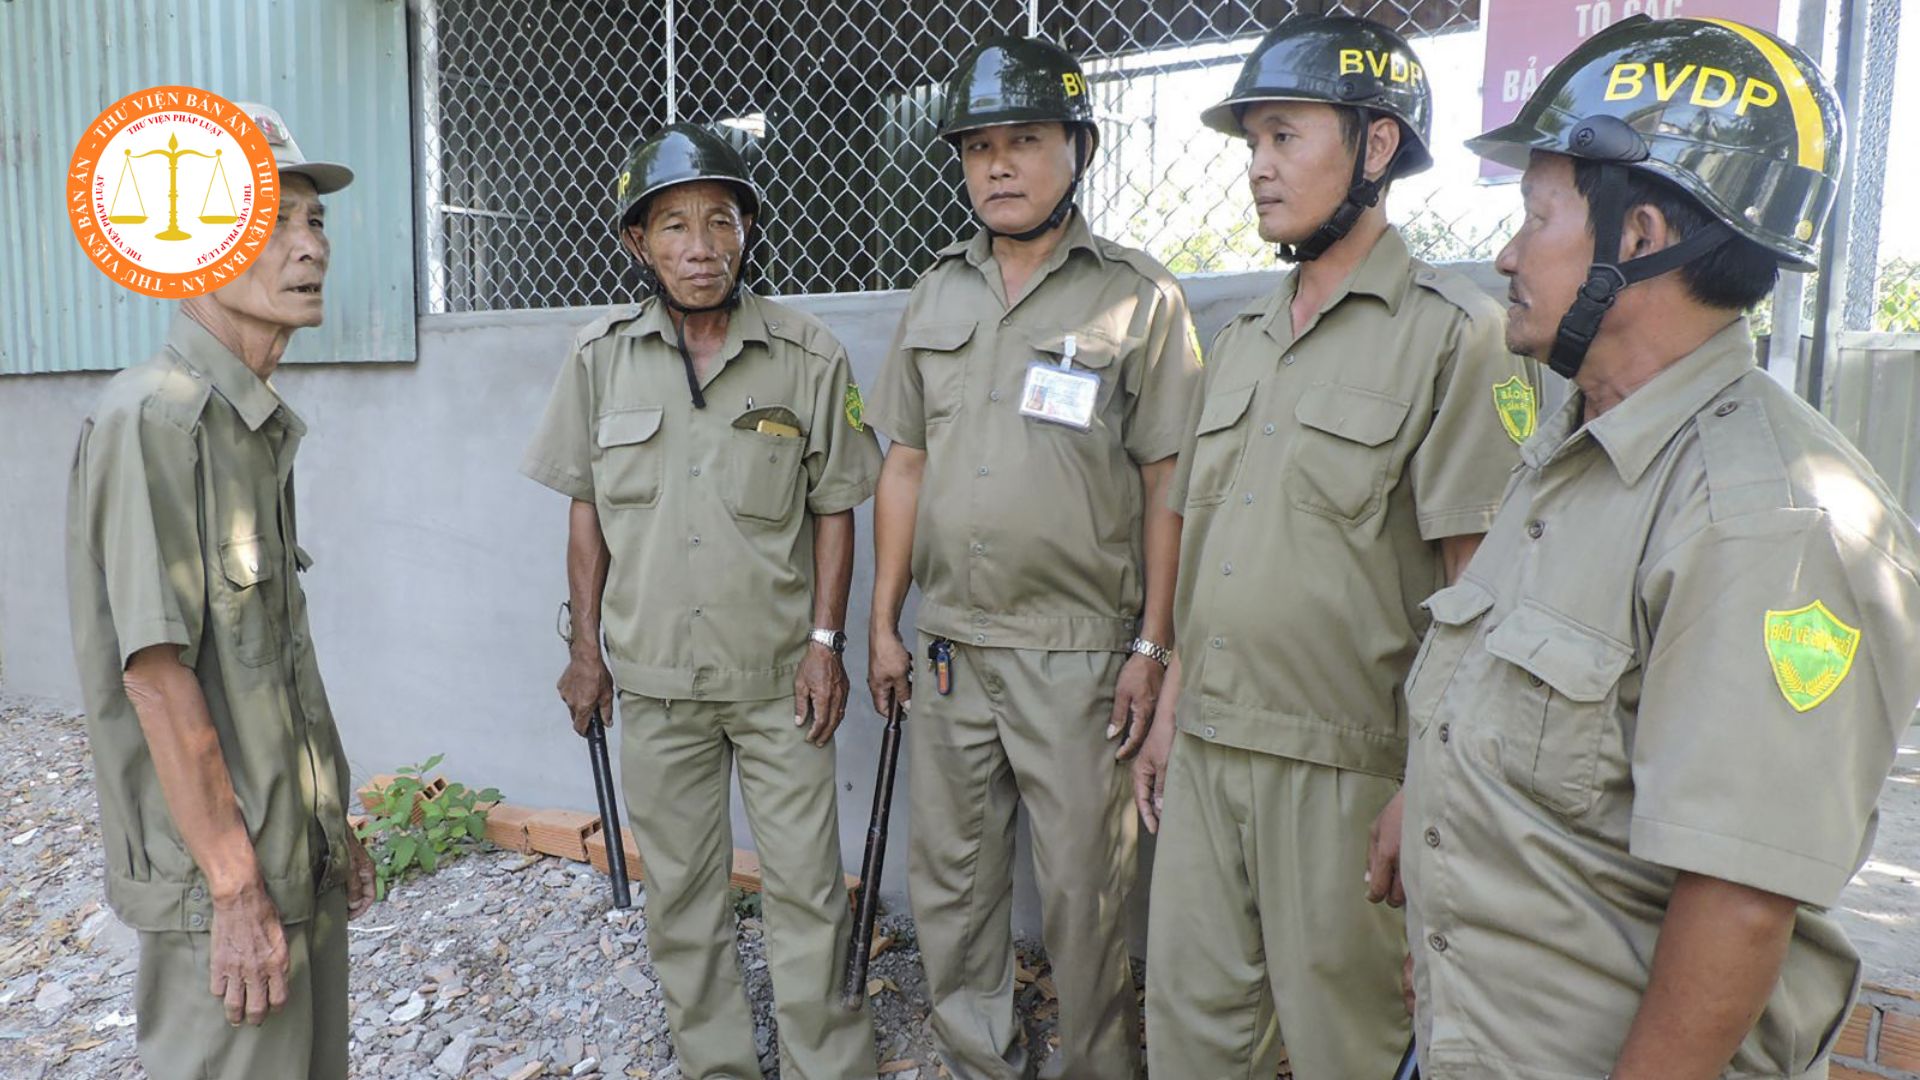 Differences between civil defense force different and street civil guard according to the regulations of the law in Vietnam